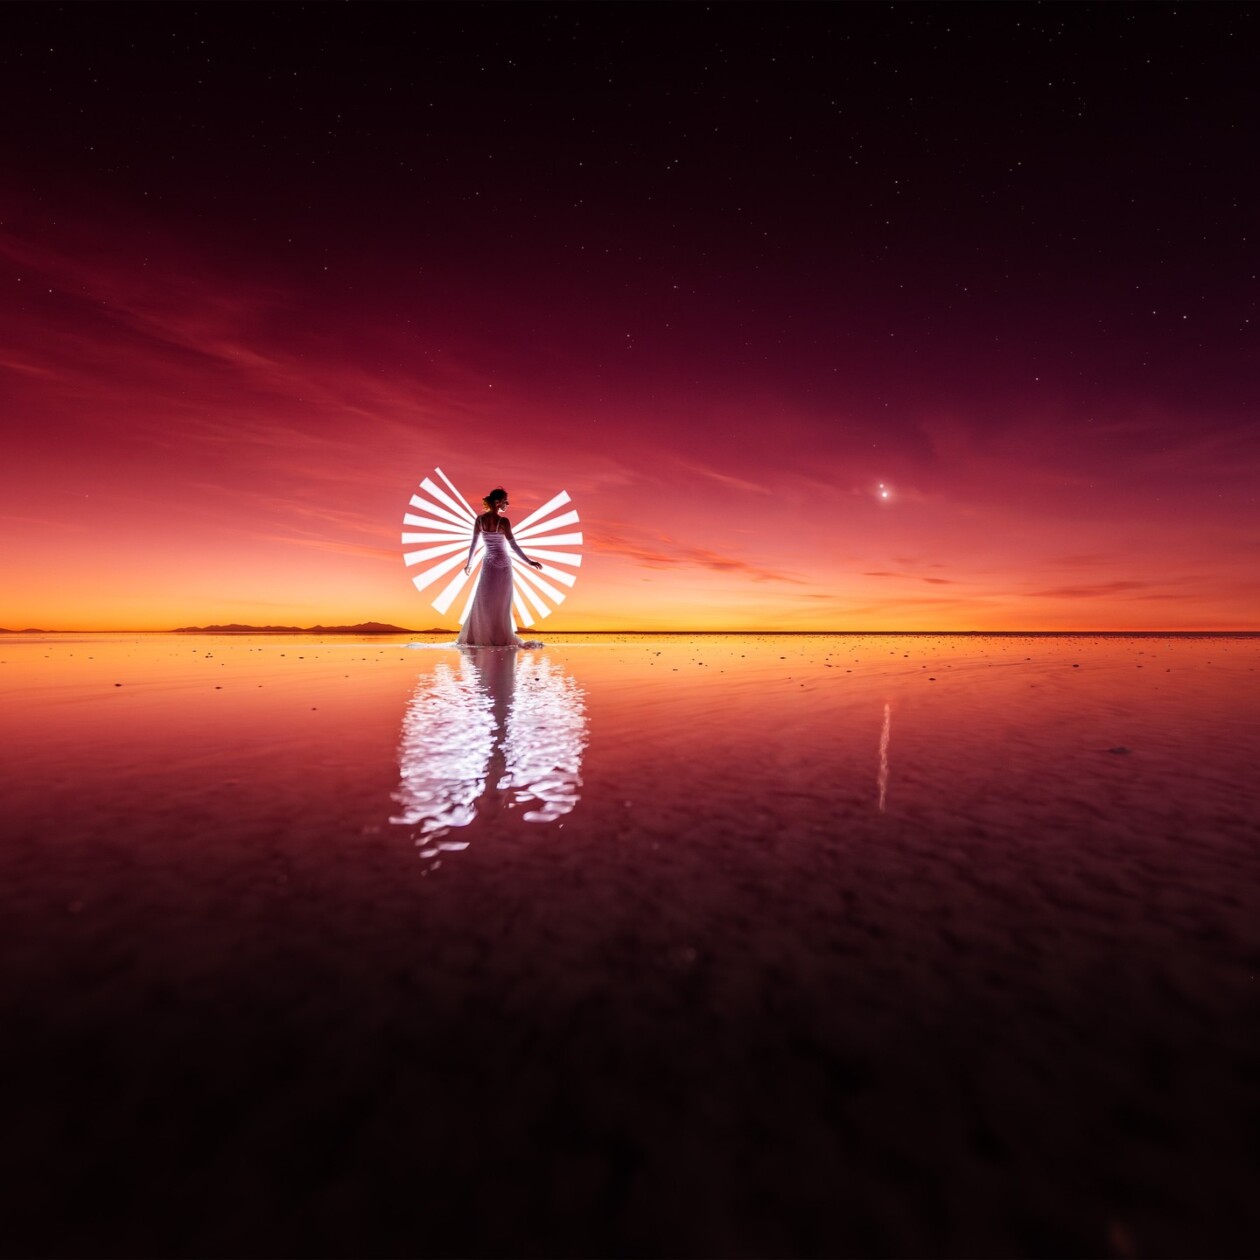 Mesmerizing Light Paintings Set Against A Fiery Red Sky At Bolivias Uyuni Salt Flat By Eric Pare And Kim Henry 2